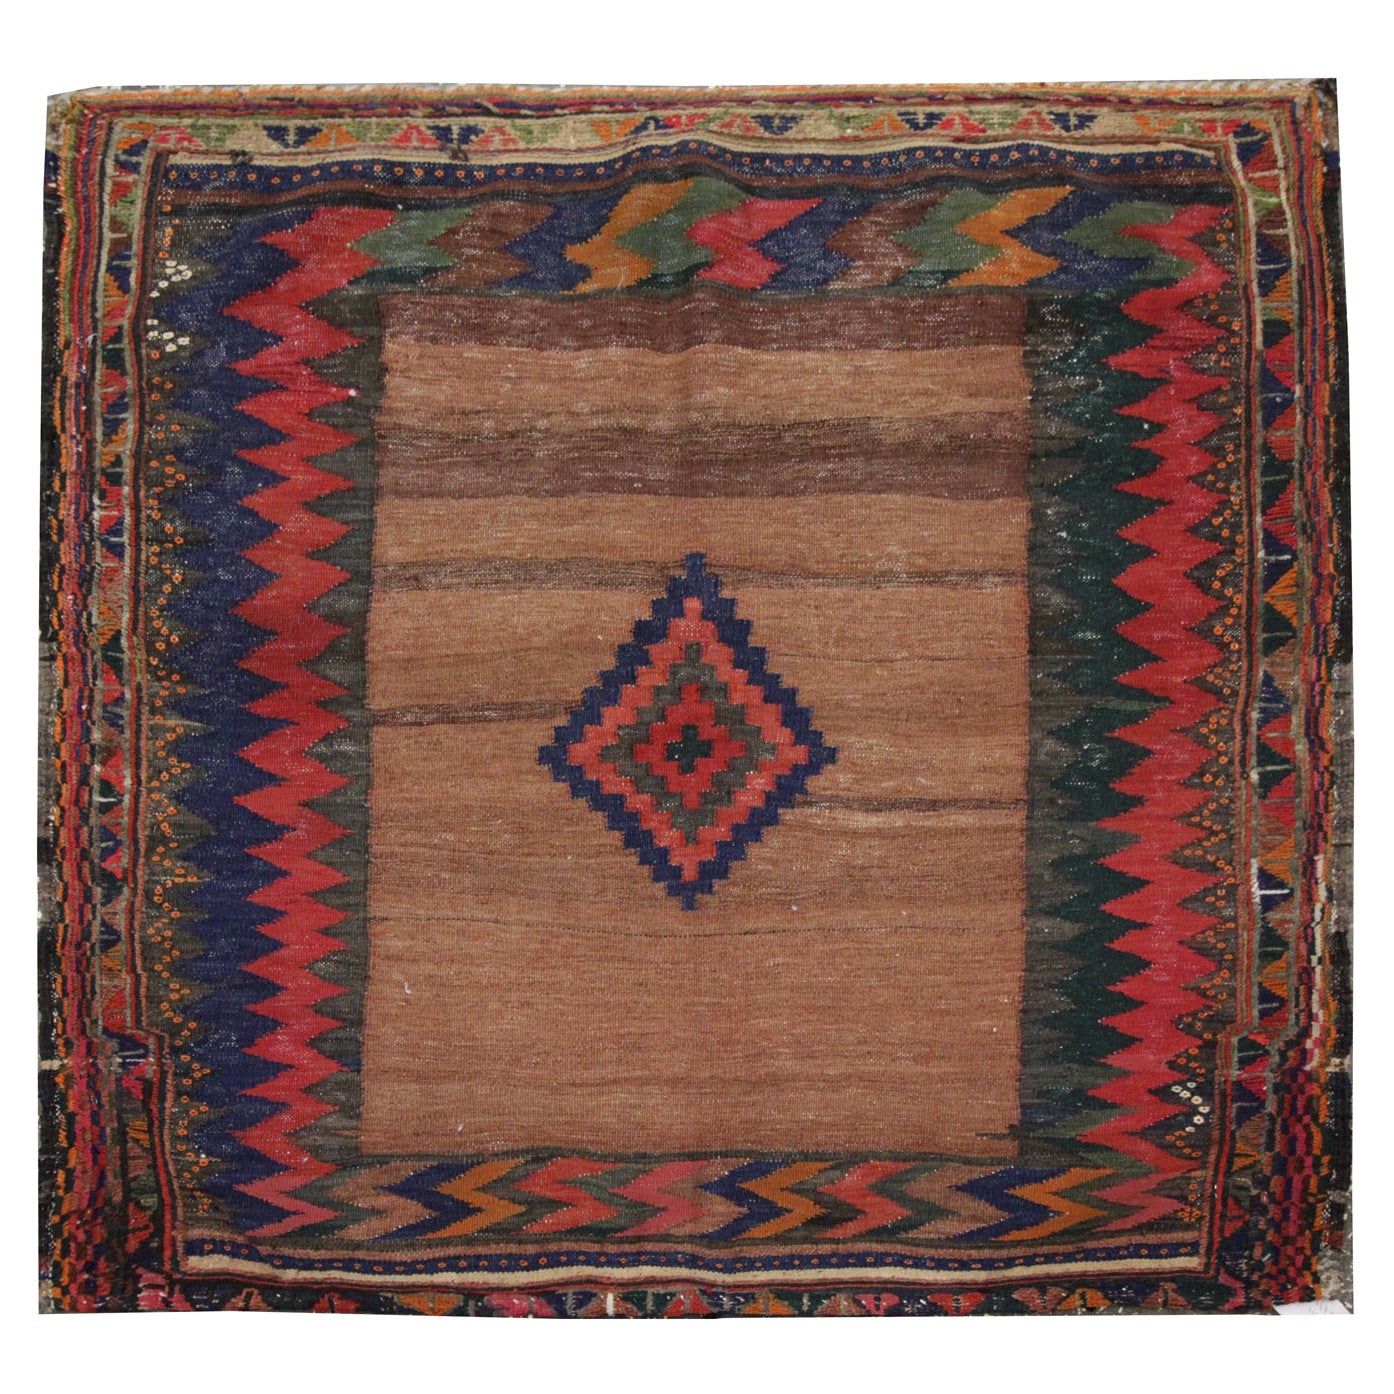 Antique Rugs, Brown "Sofreh" Wool Carpet, Small Square Kilims Area Rug